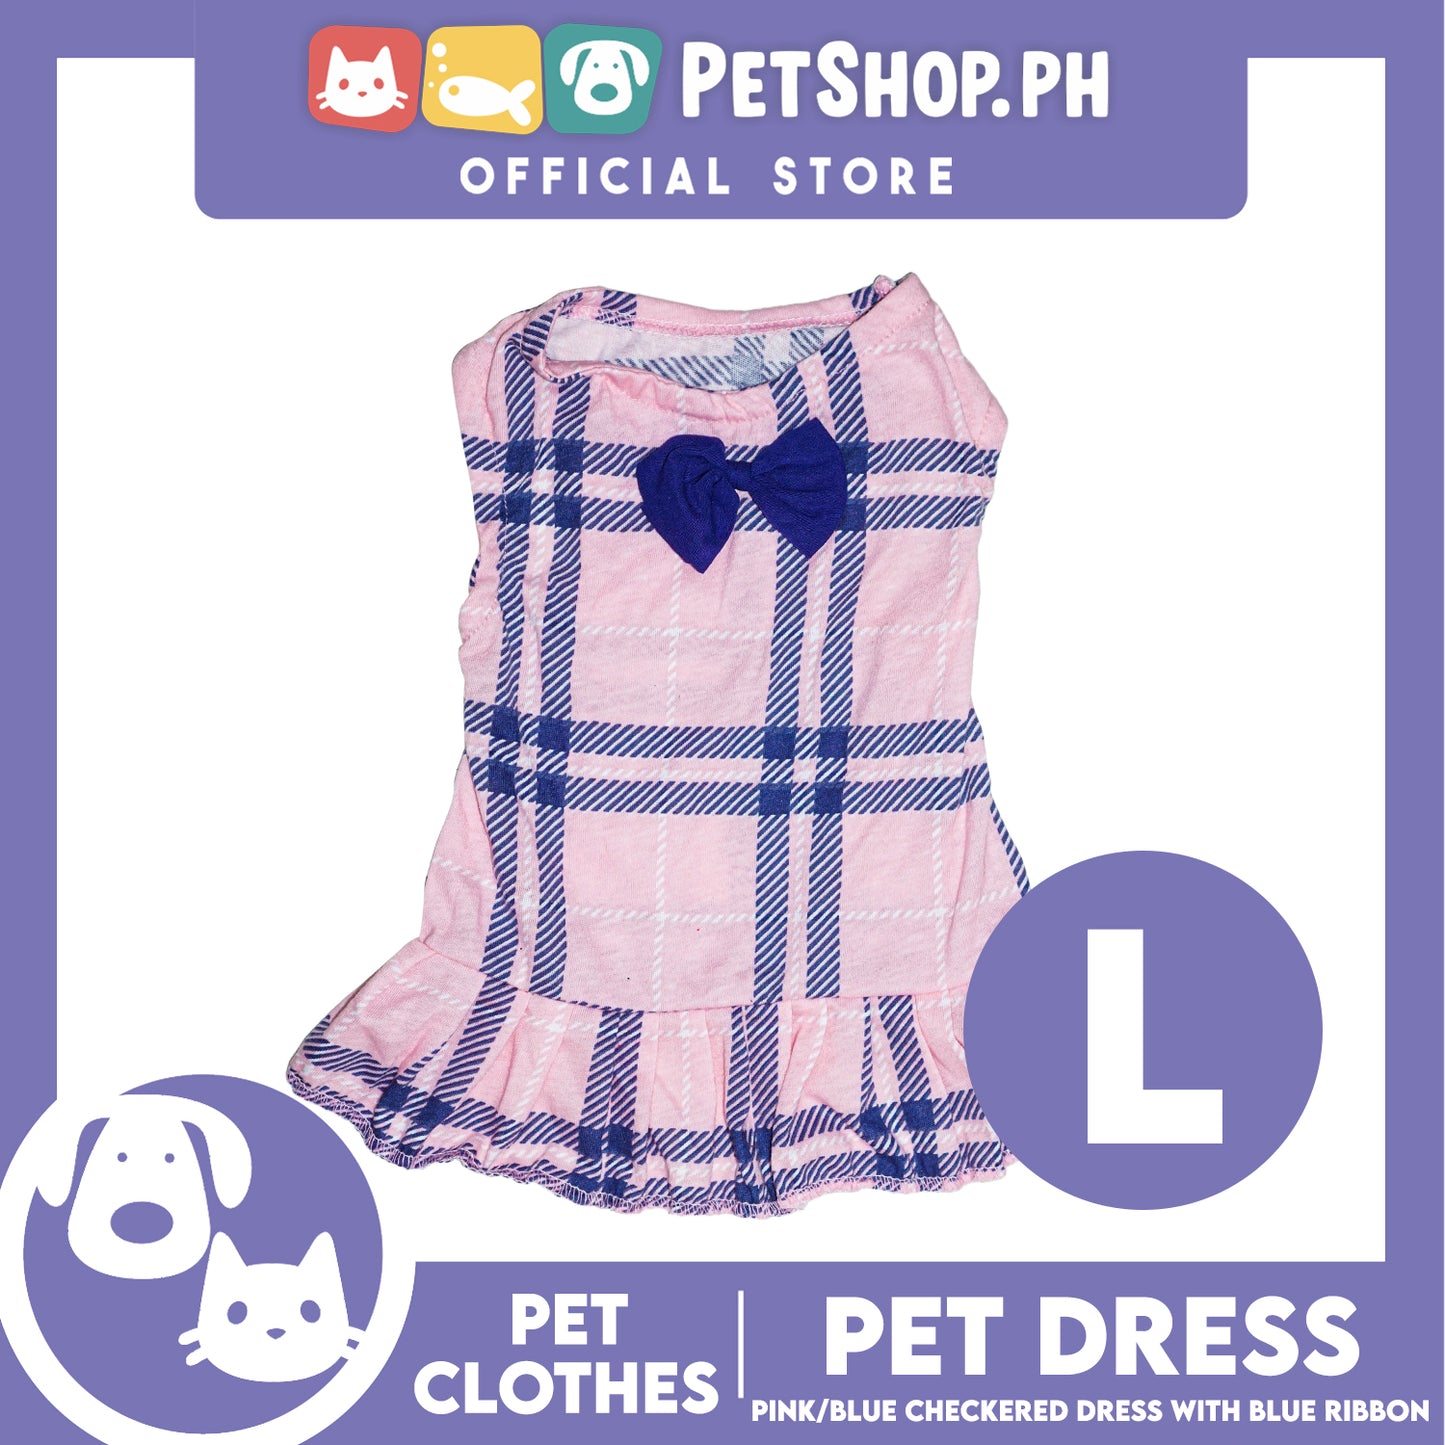 Pet Dress Pink/Blue Checkered Dress with Blue Ribbon (Large) Perfect Fit for Dogs and Cats